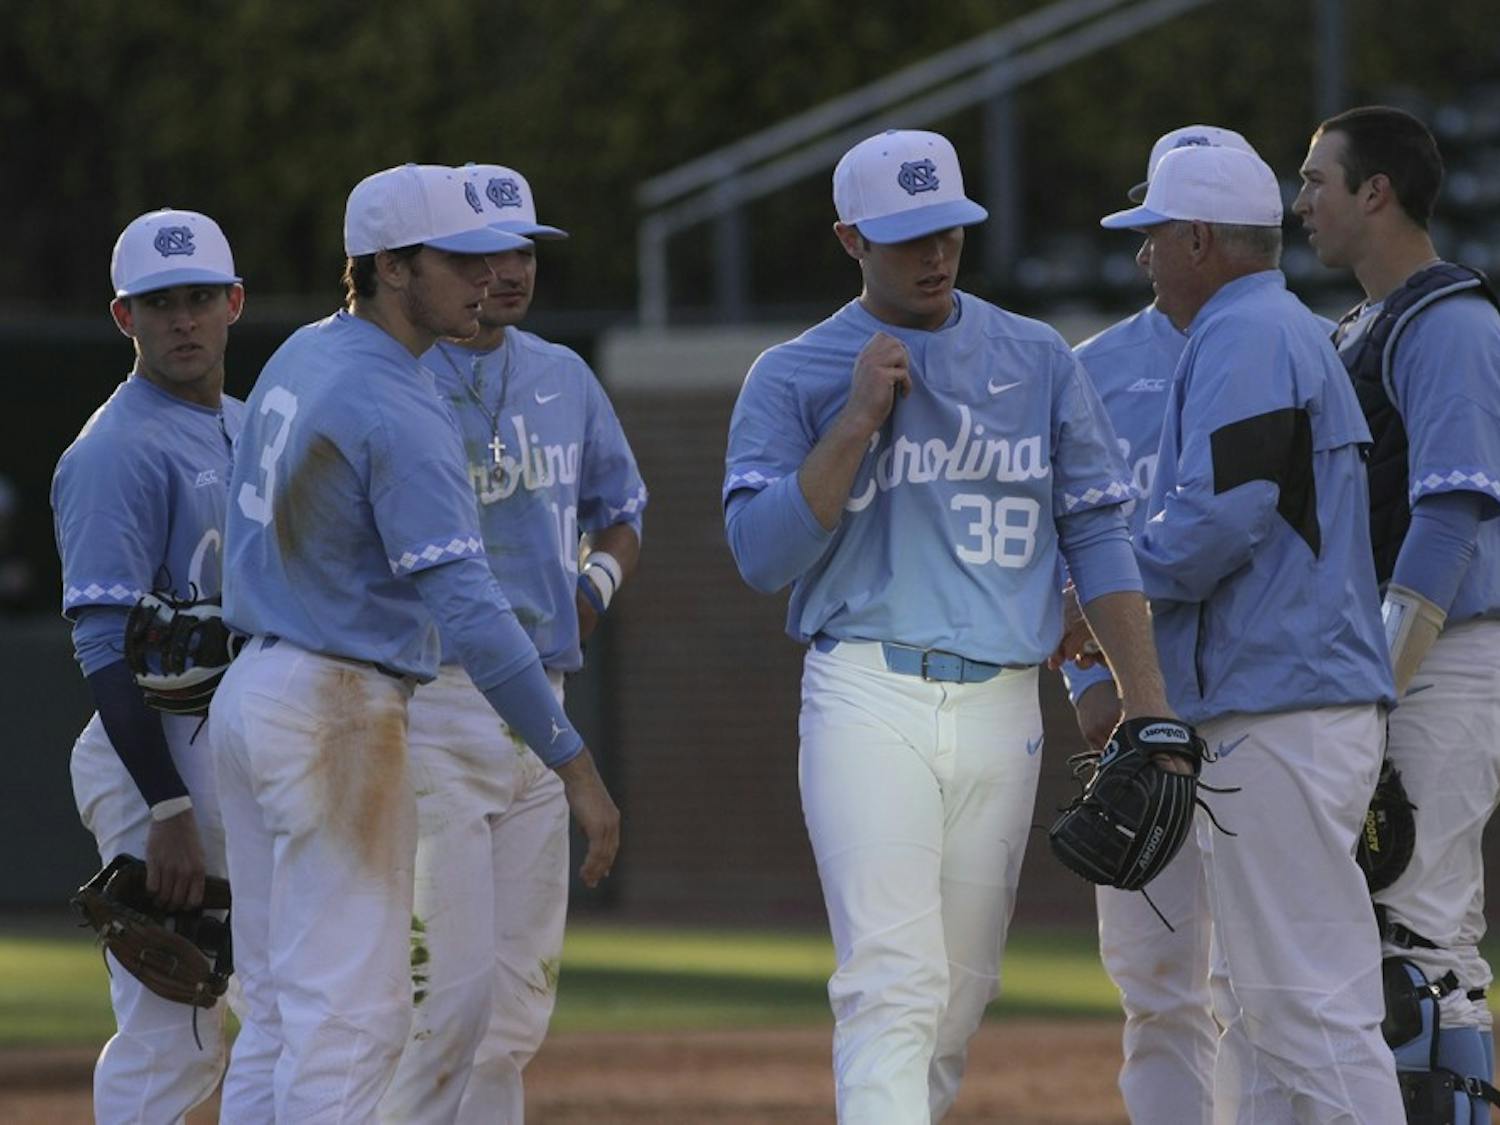 Former UNC pitcher J.B. Bukauskas (38) is pulled out of the game against Long Beach State on March 3, 2017 in Chapel Hill.&nbsp;